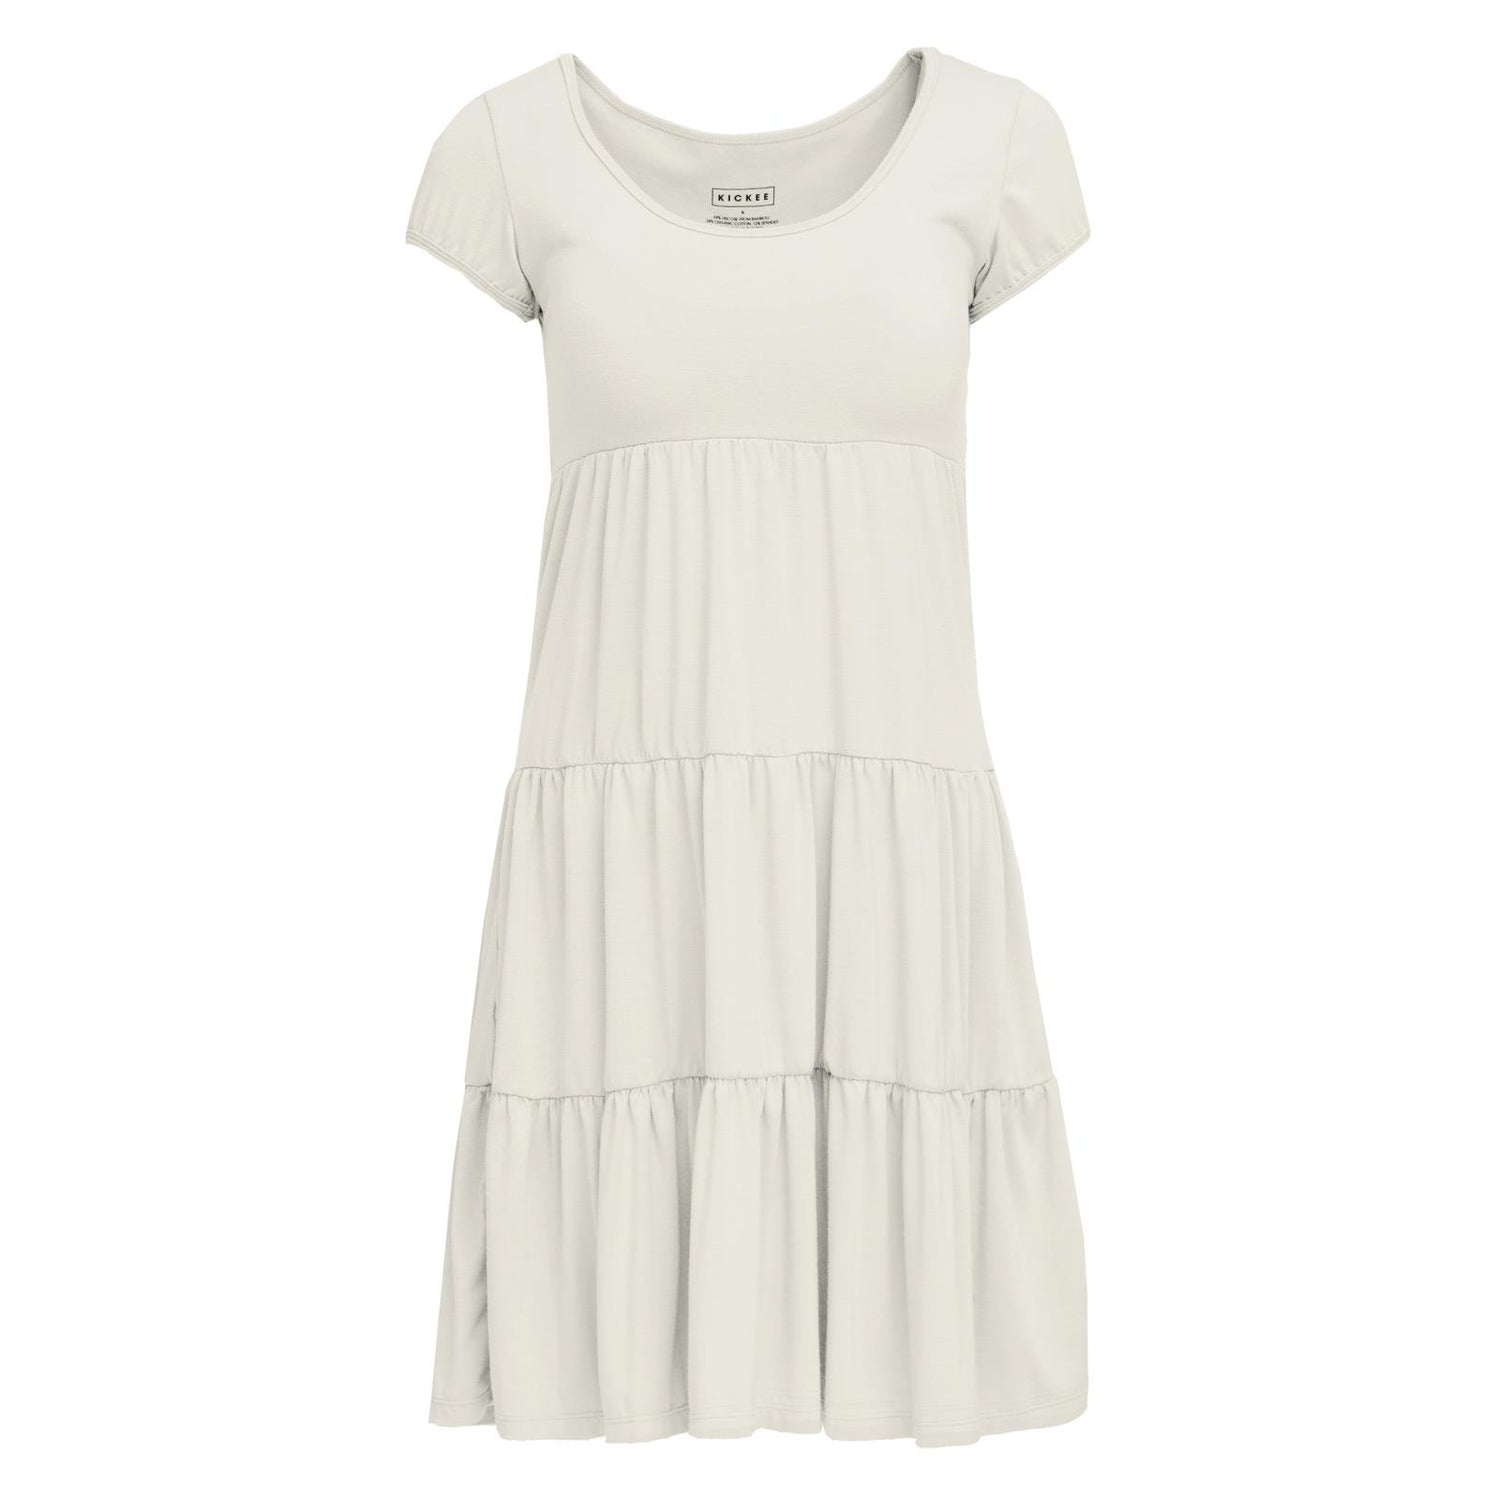 Women's Sundress with Luxe Top in Natural